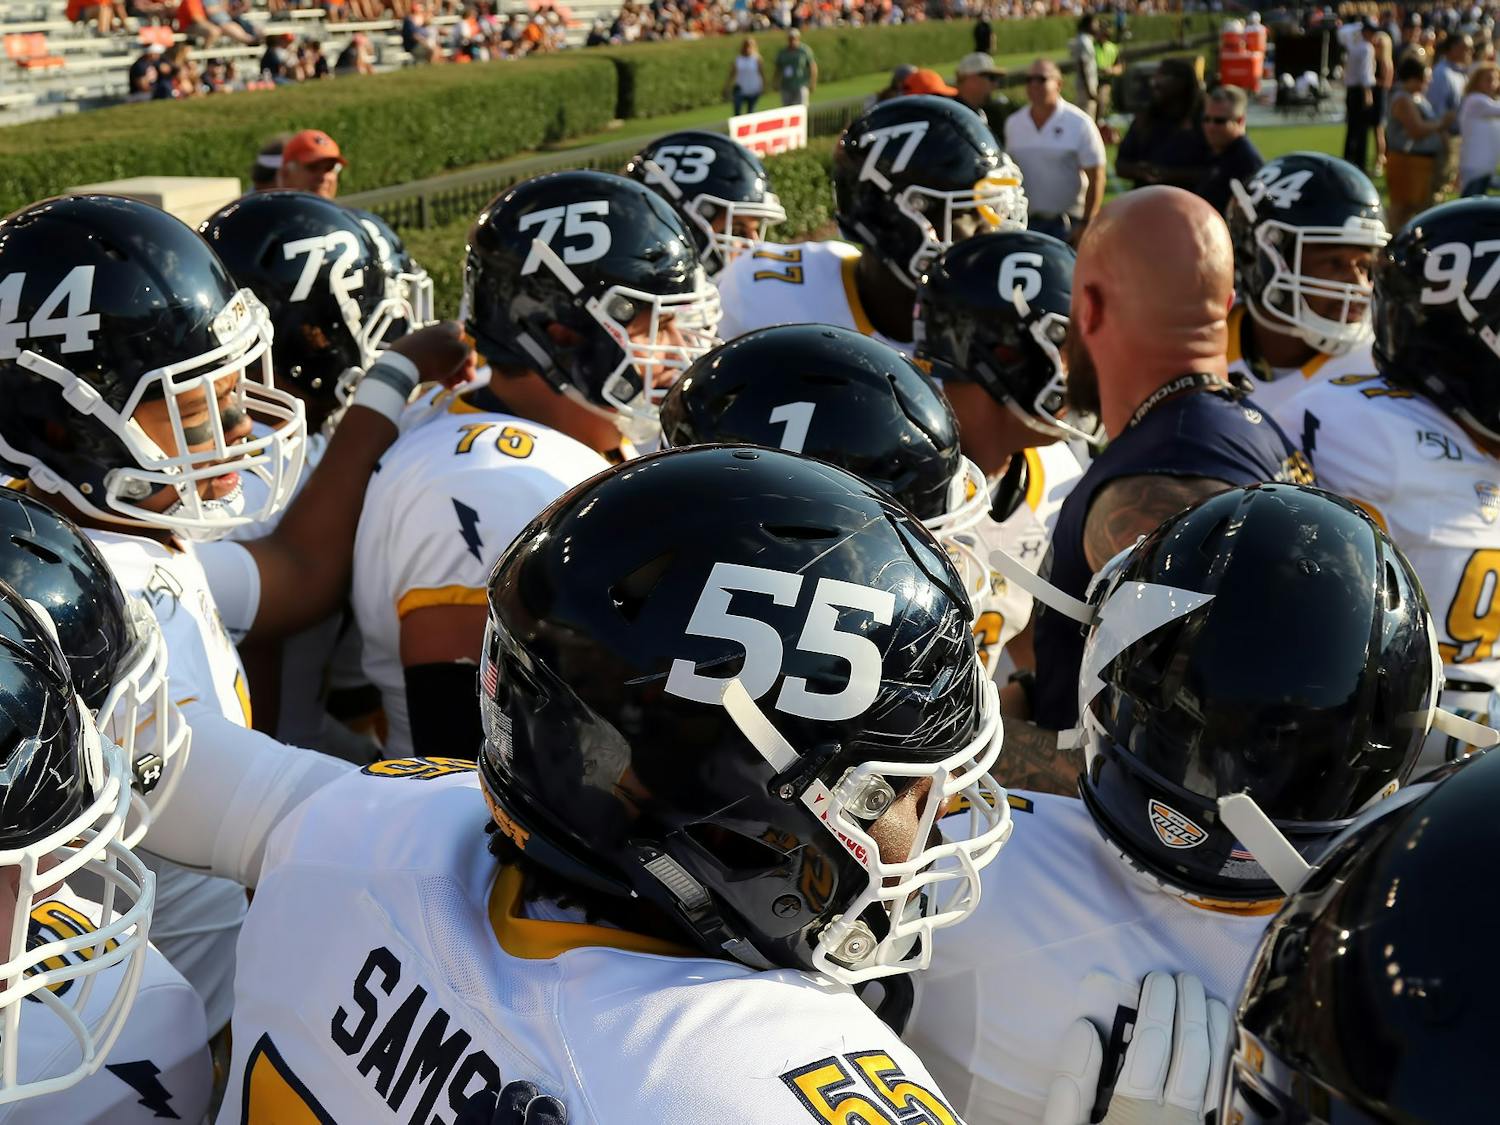 Golden Flashes players huddle around their coach for instructions.